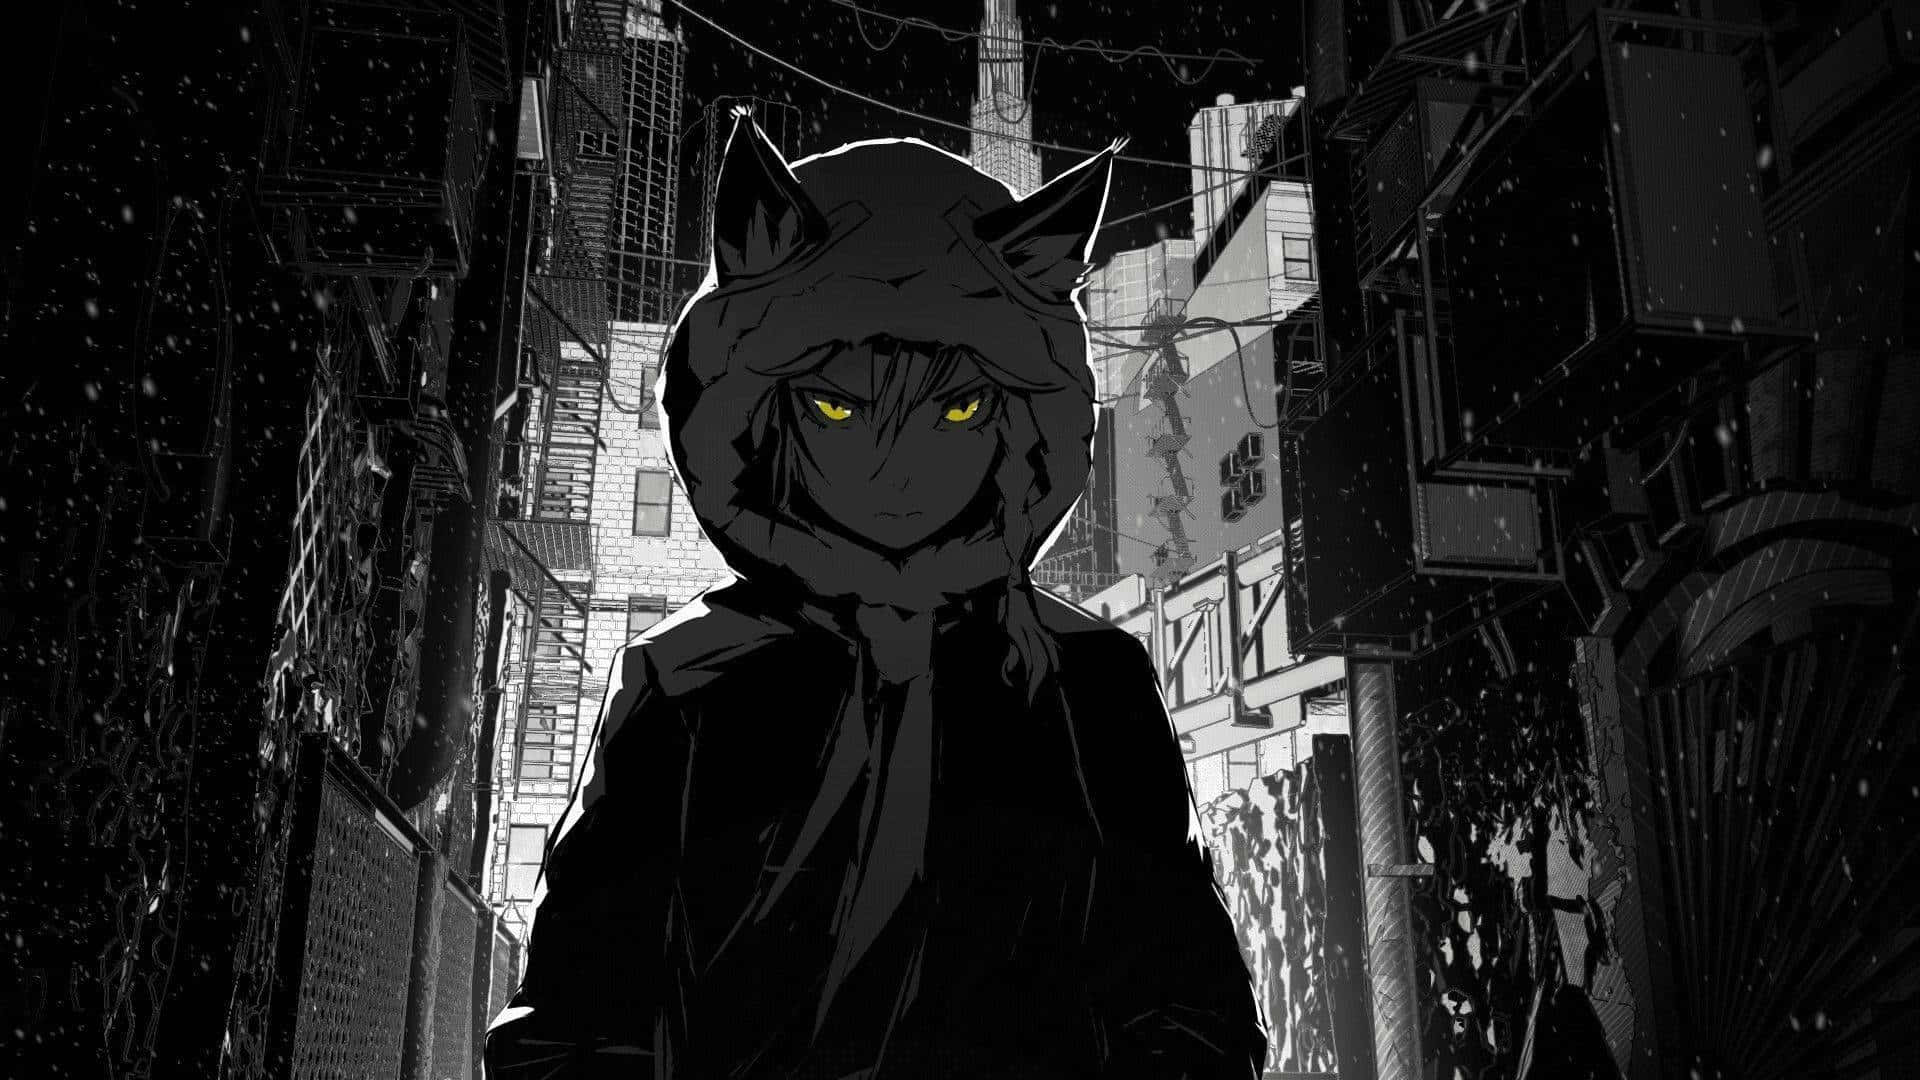 Intimidating anime boy with glowing red eyes in a horror setting. Wallpaper